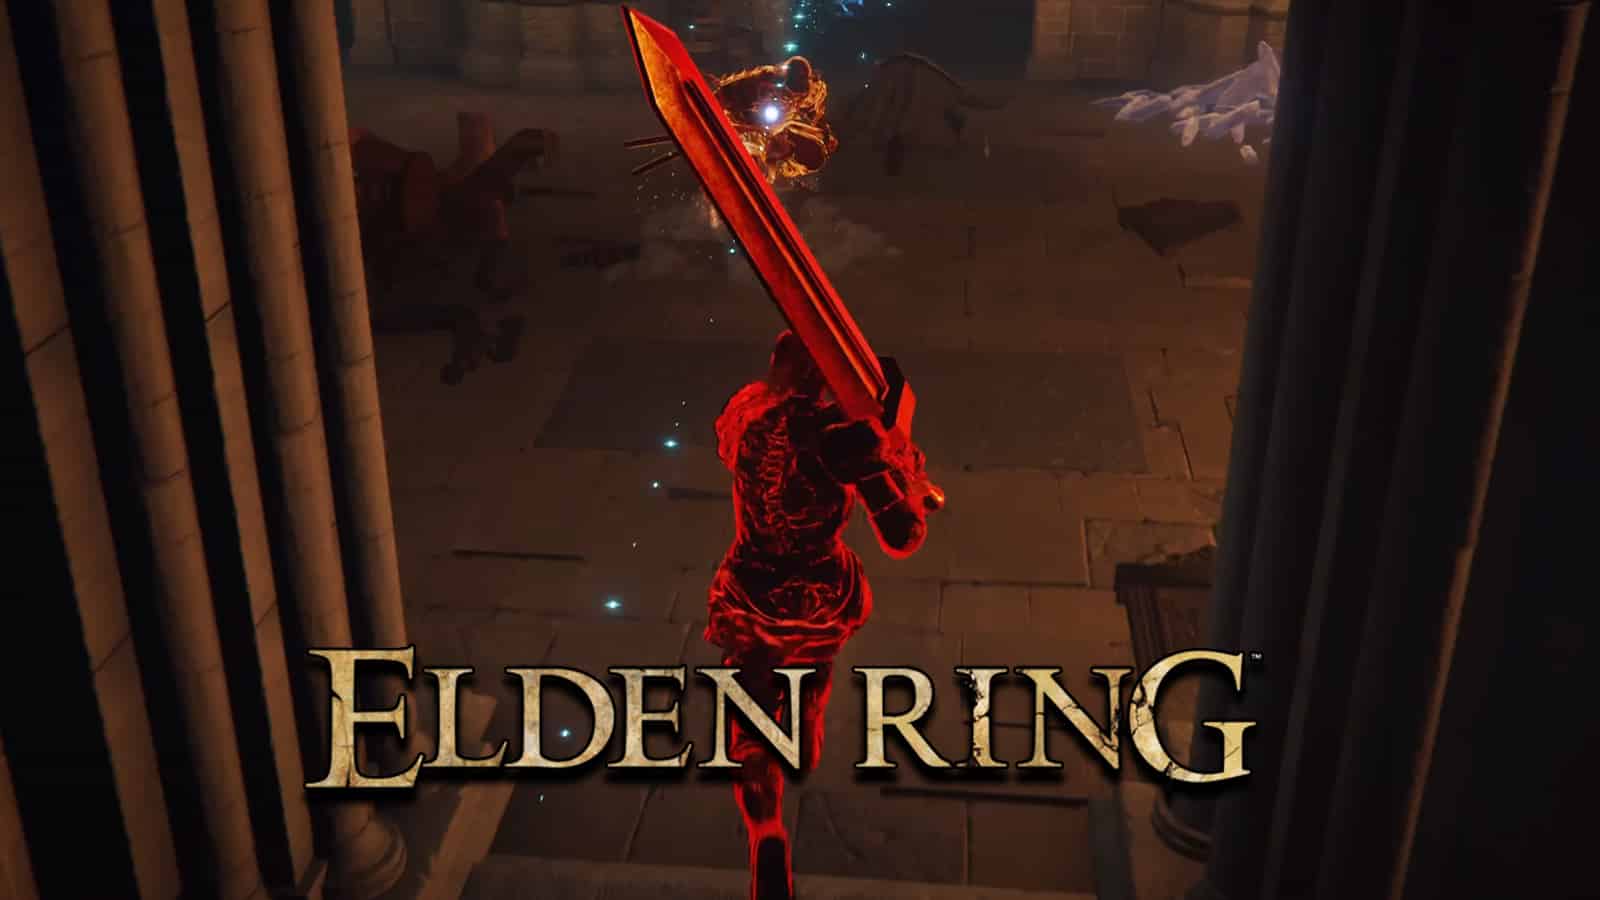 Psa Elden Ring Hackers Are Breaking Players Save Files With Infinite Falling Death Loop